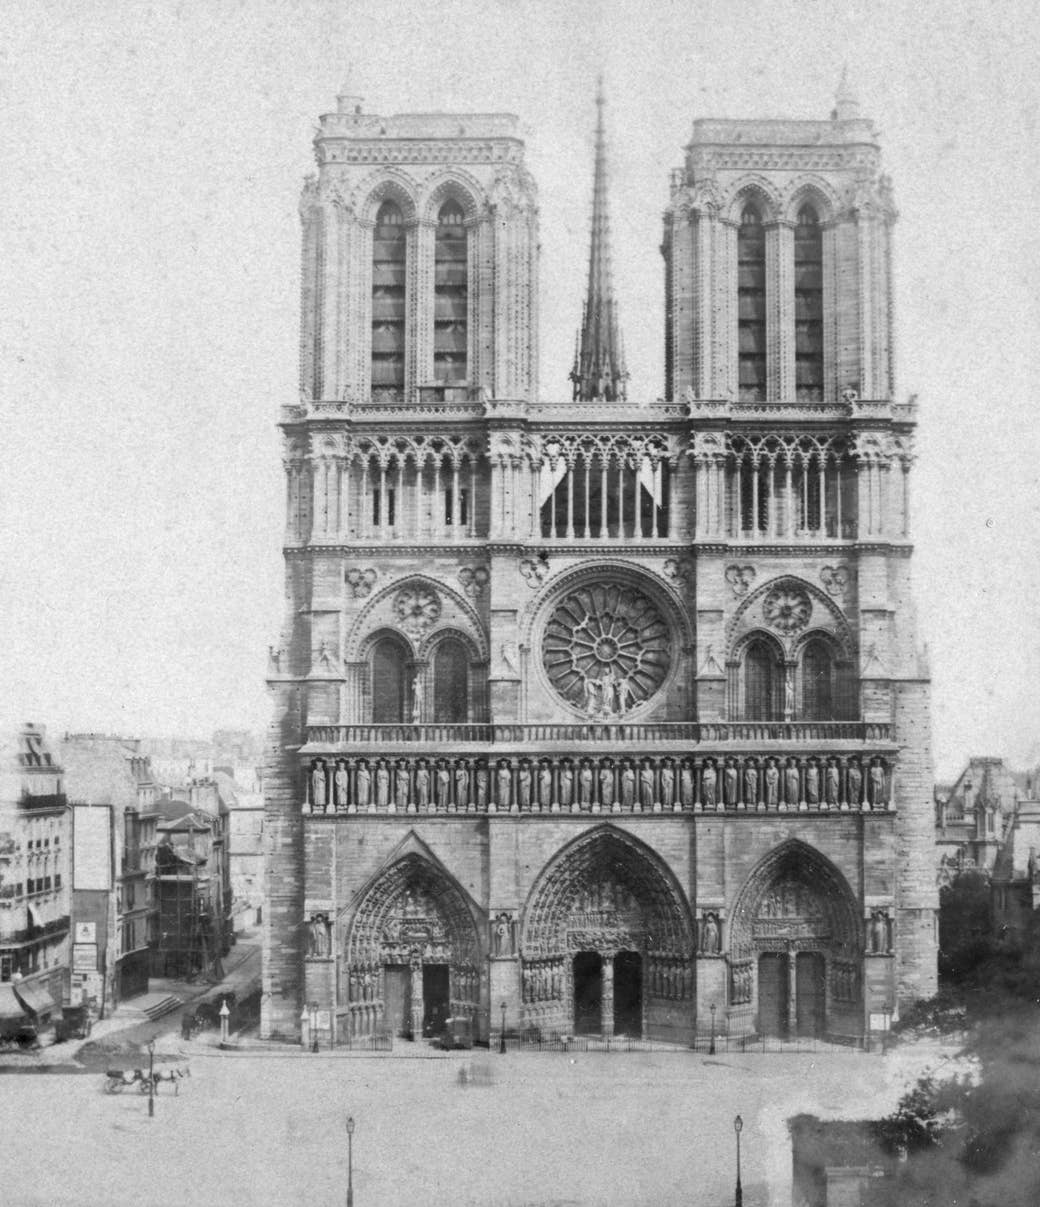 Notre-Dame Cathedral, France, late 19th or early 20th century. The Gothic Cathedral of Notre Dame de Paris was begun in the 12th century. The western facade was built between c1200 and 1225.